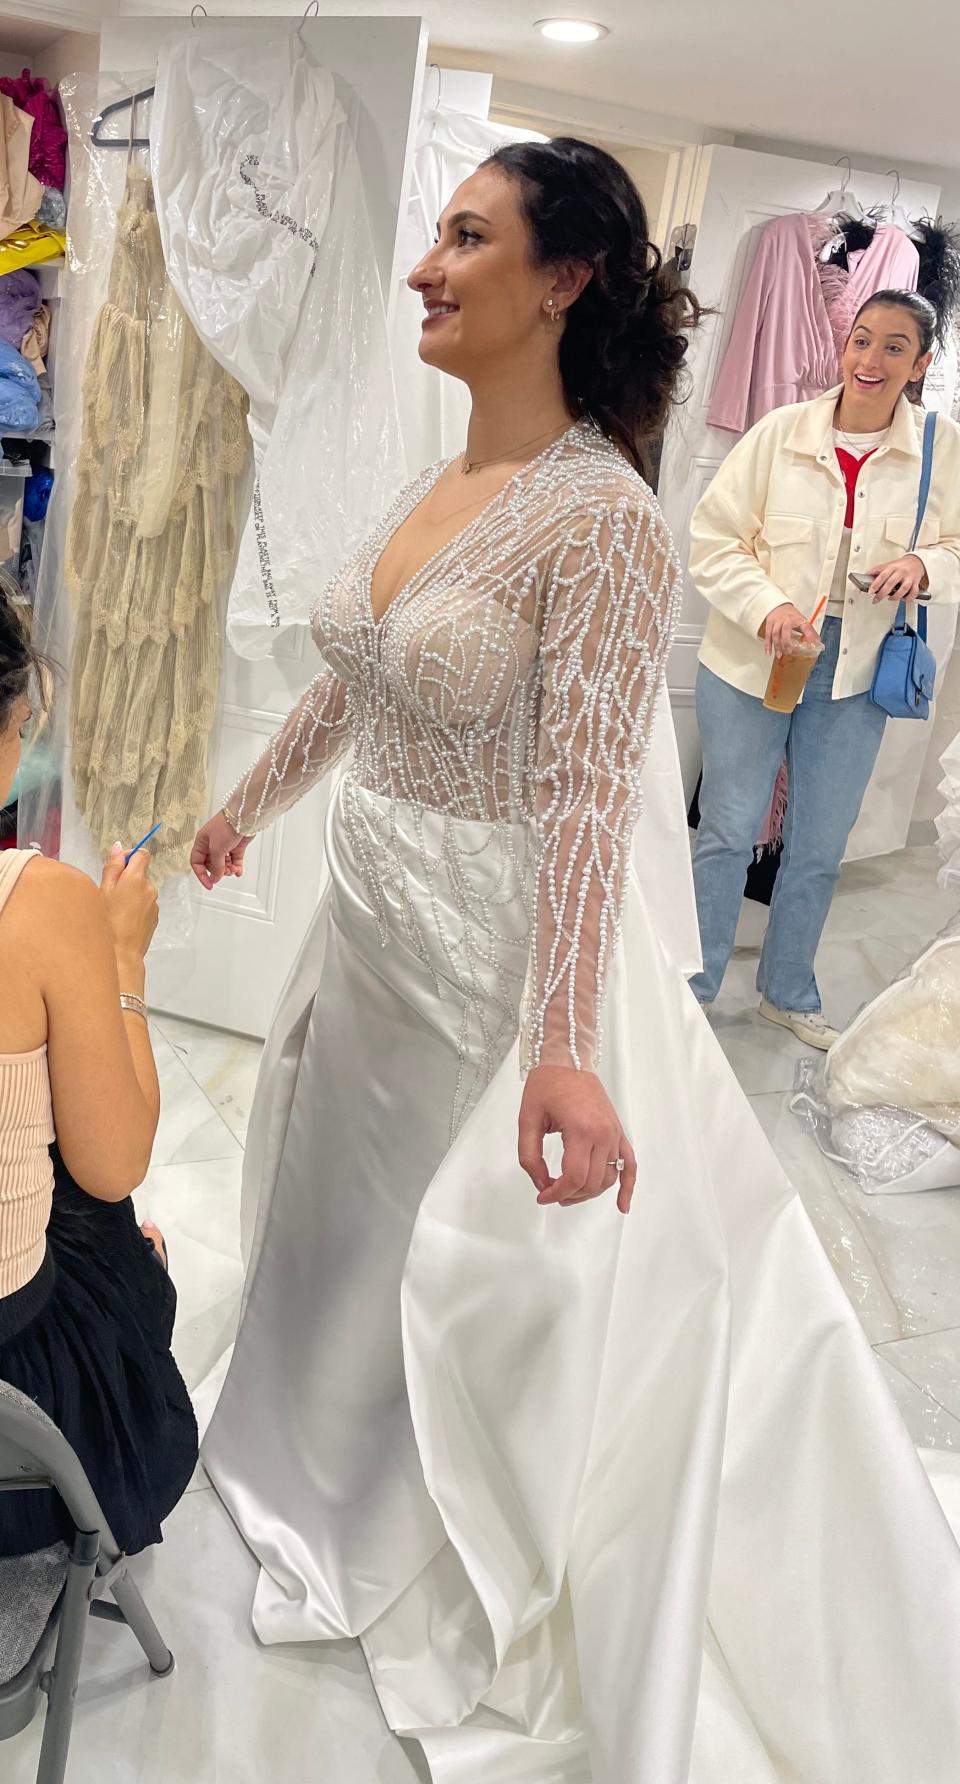 Pepa trying on the custom wedding dress, with a friend in the background staring with an open mouth at the gown